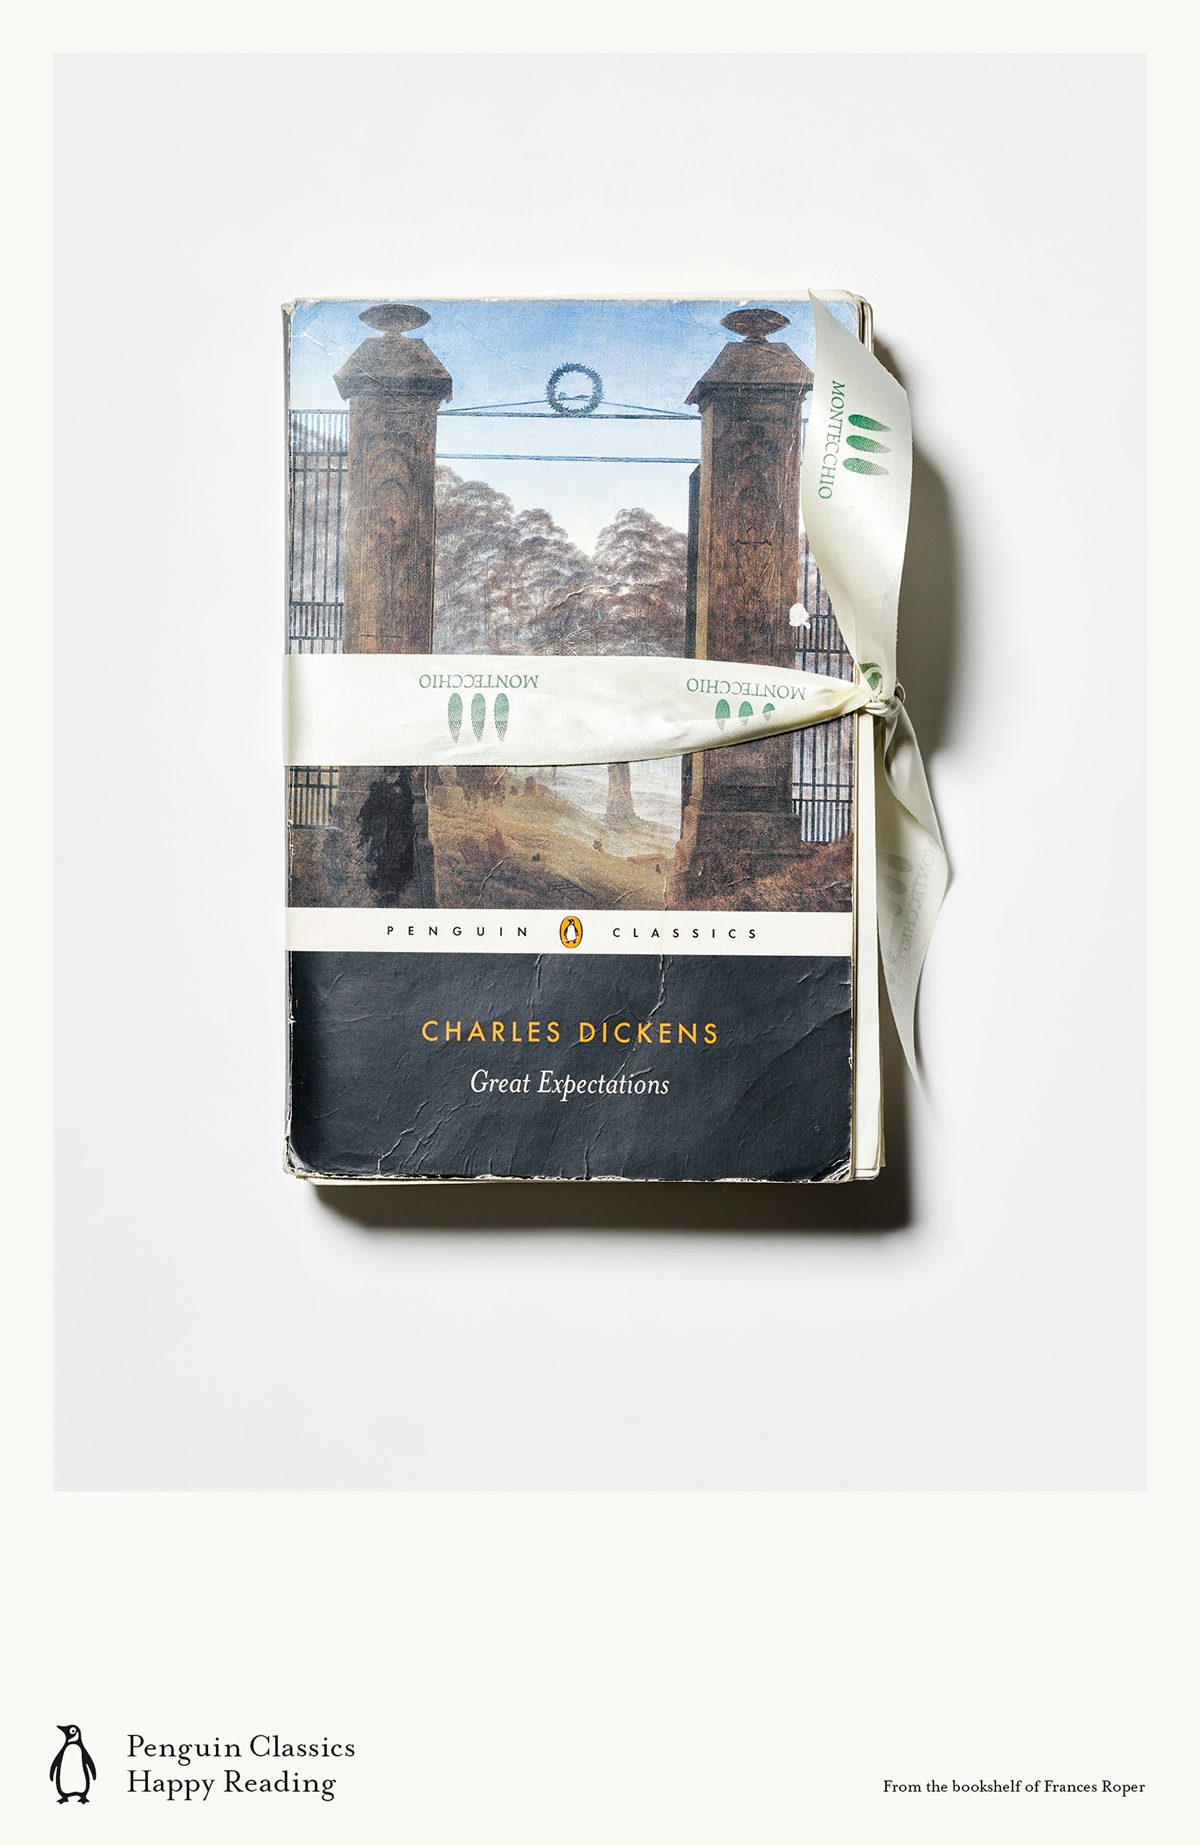 New Penguin Classics ads pay homage to old favourites